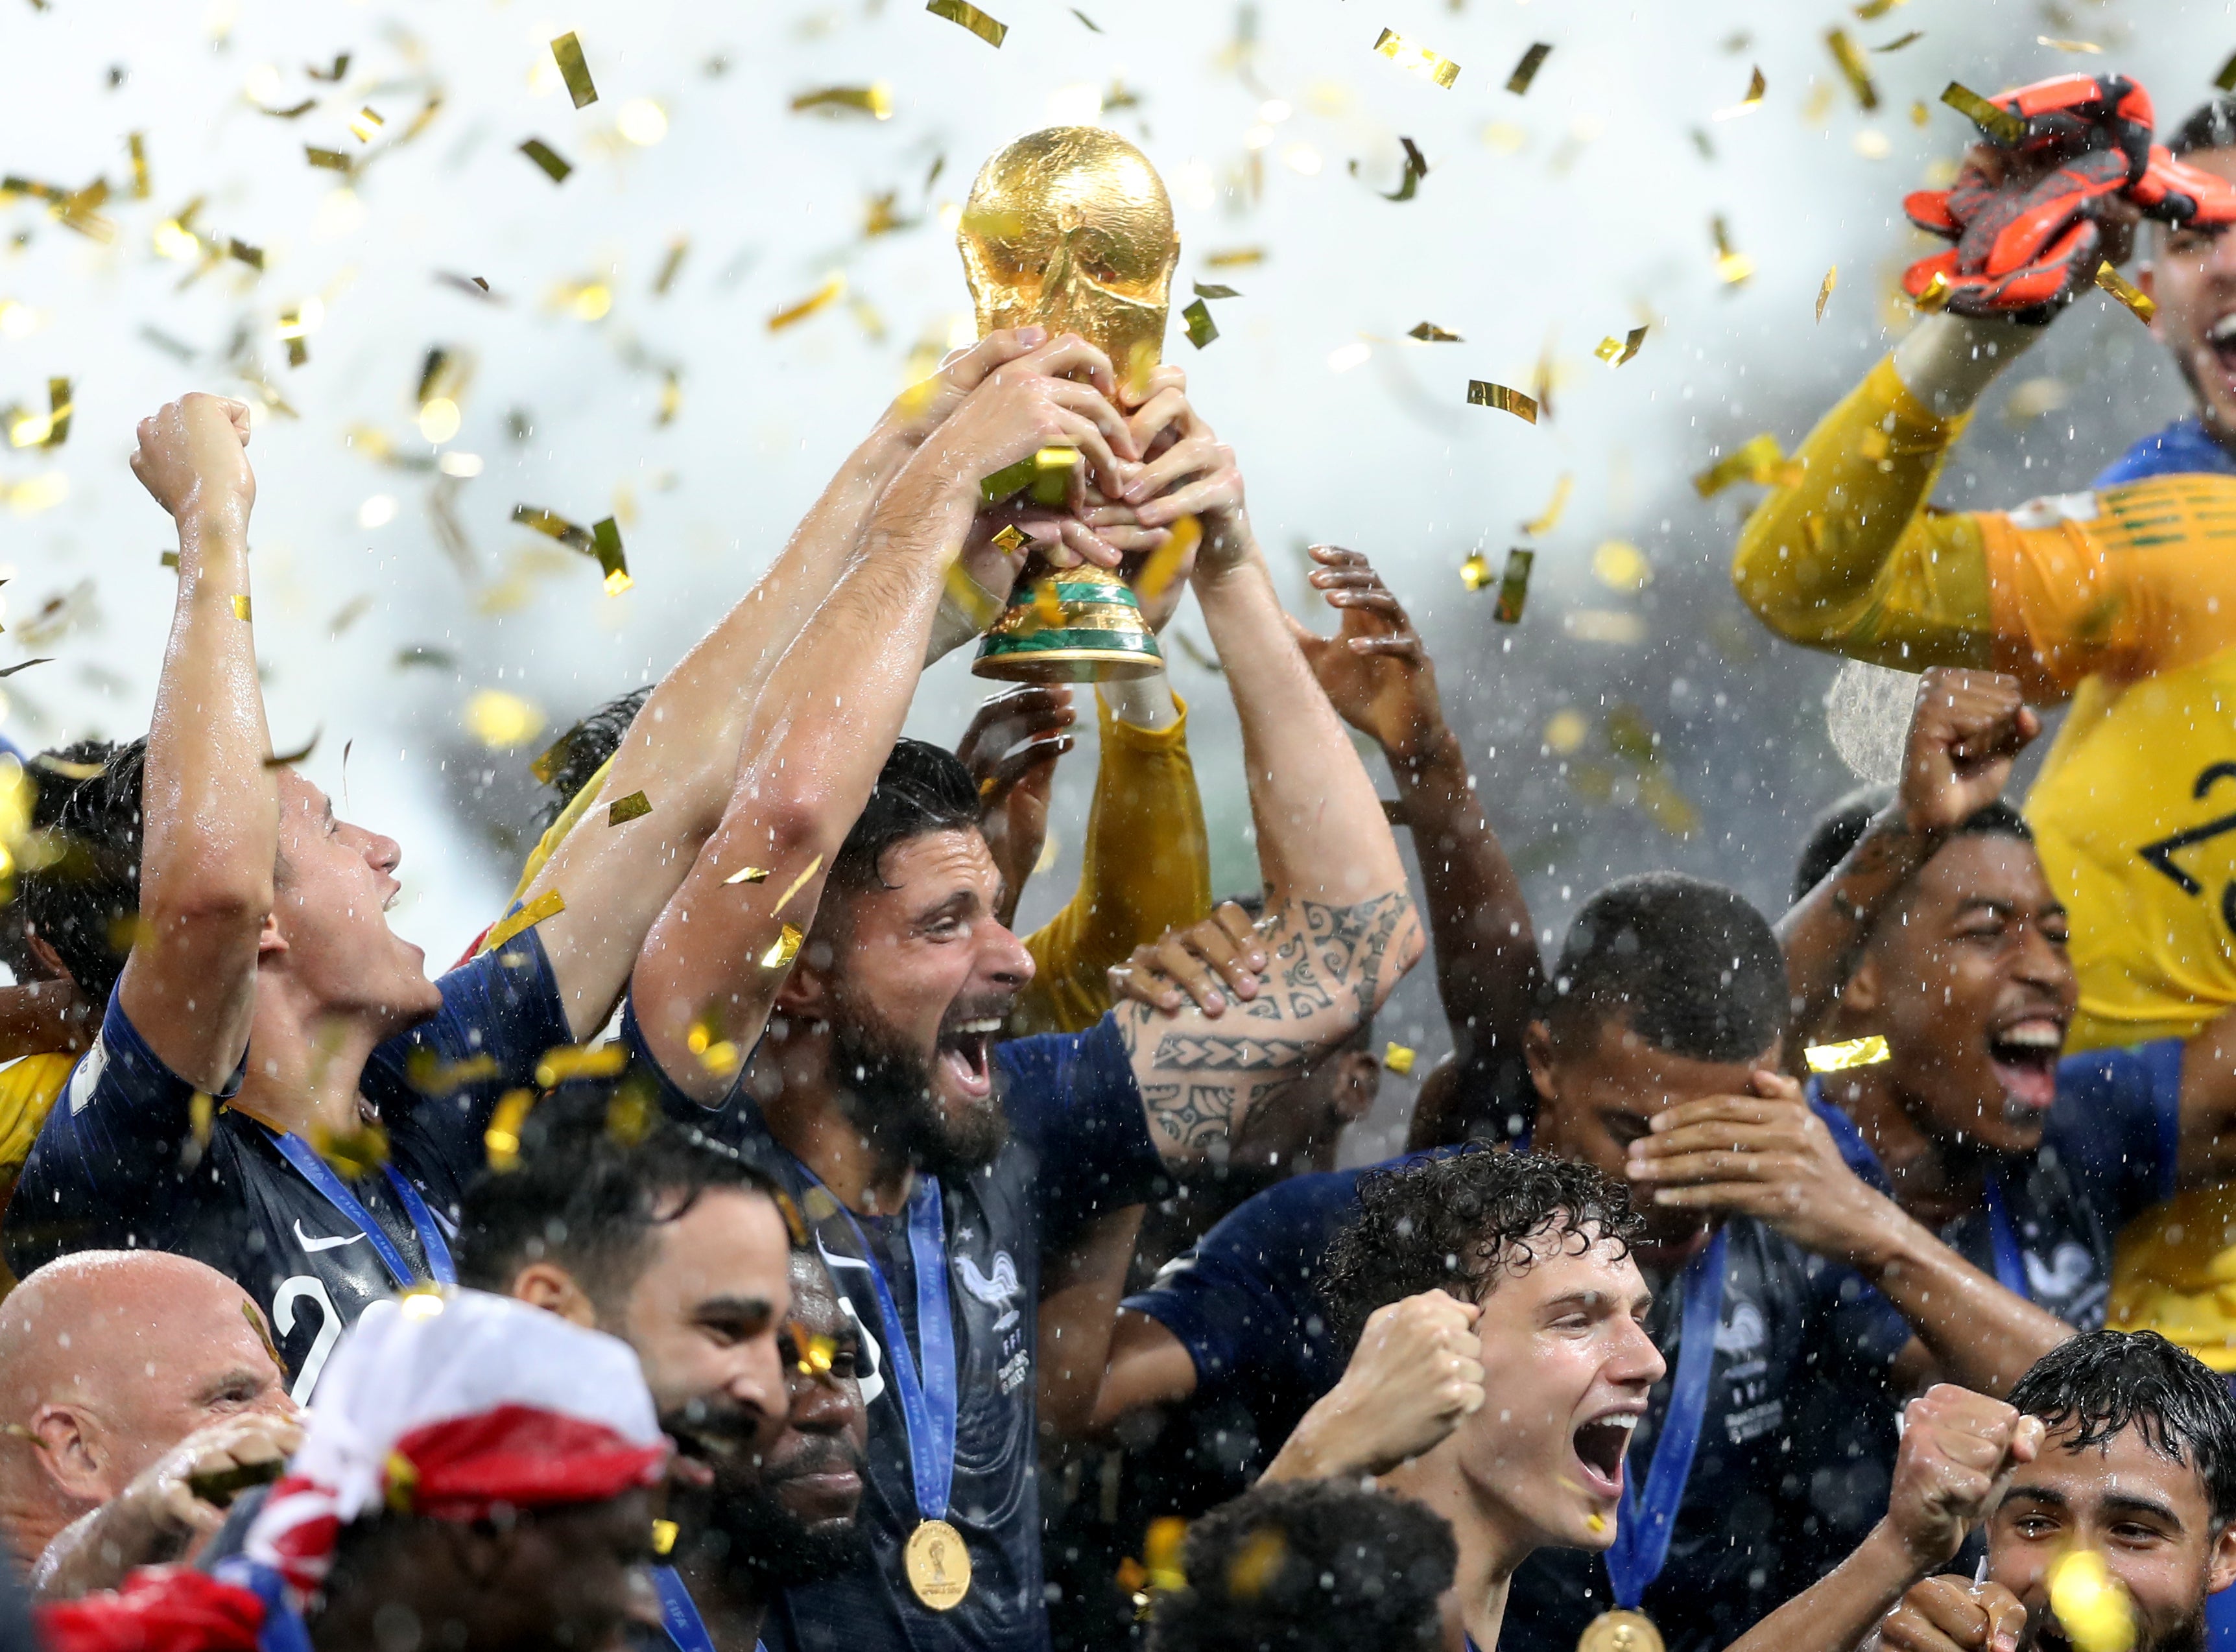 Introducing a World Cup every two years will have no legitimacy without player support, FIFPRO has warned (Owen Humphreys/PA)